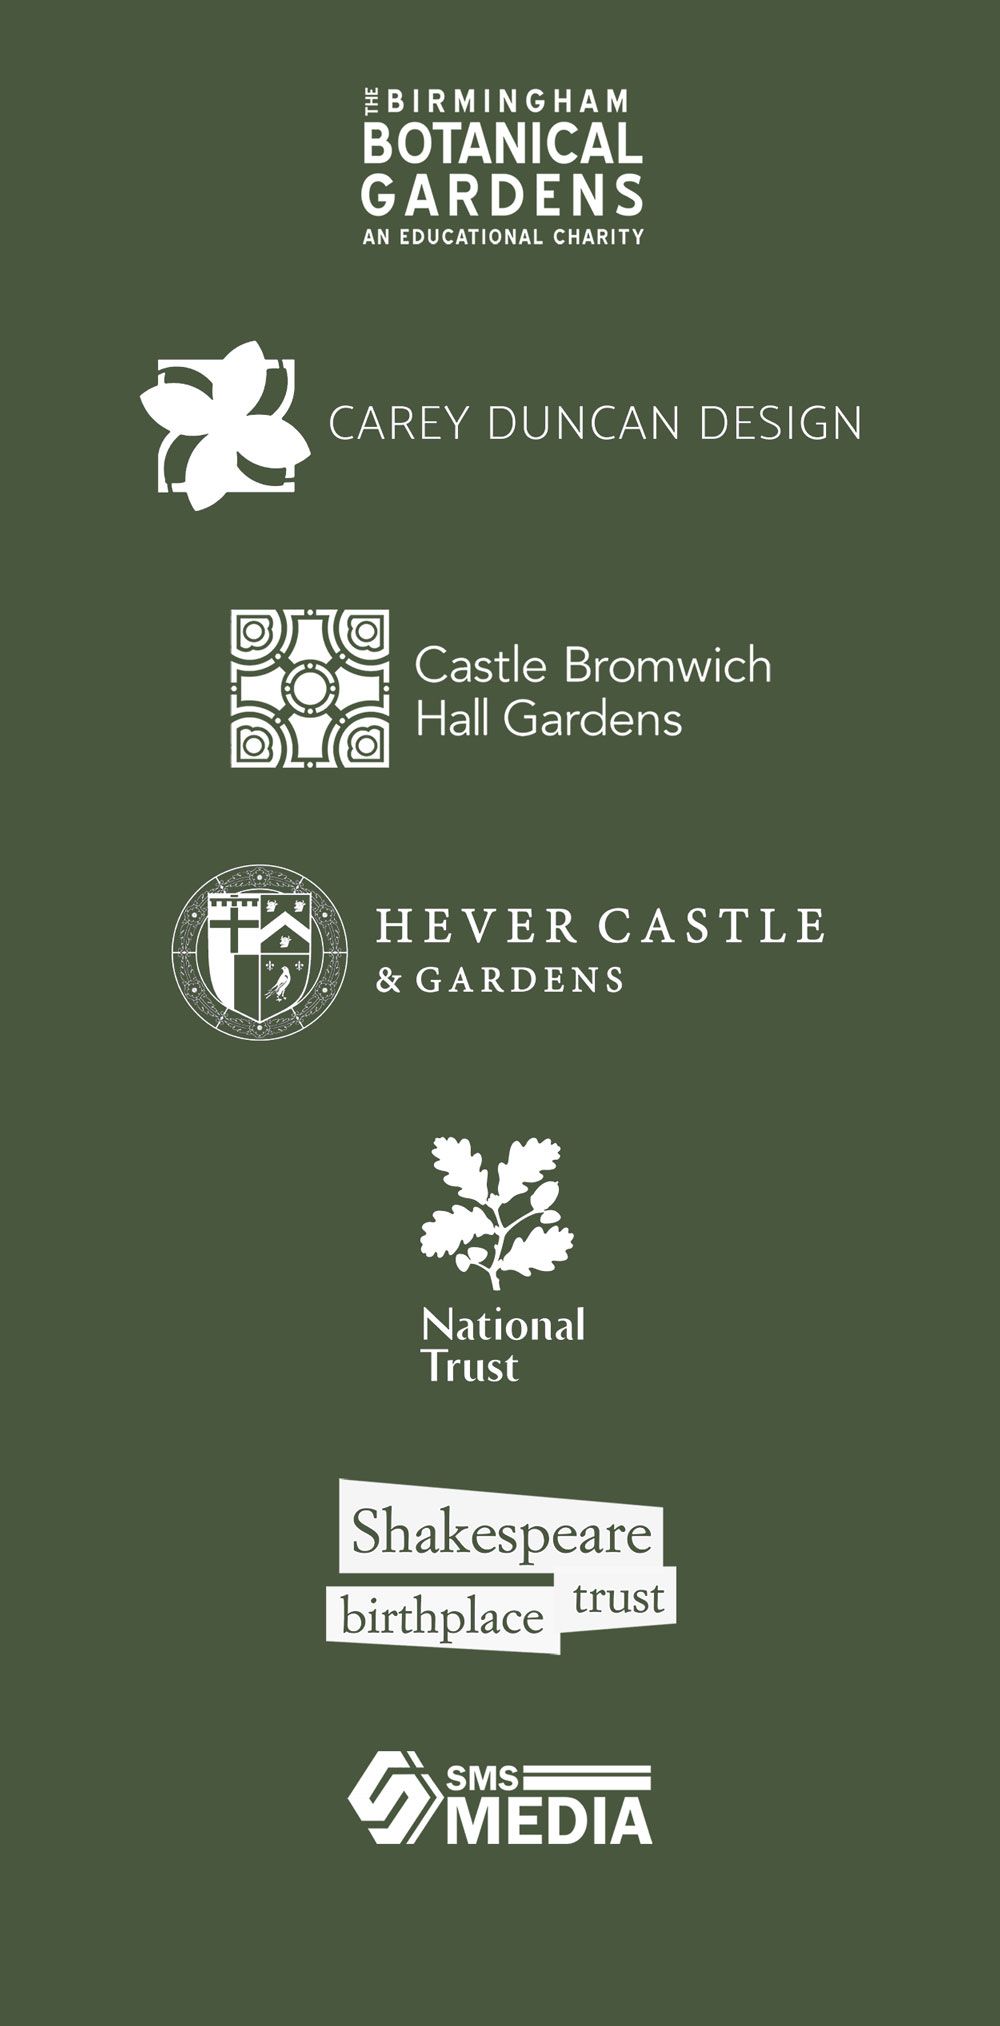 Our Supporters: Birmingham Botanical Gardens; Carey Duncan Design, Rabat; Castle Bromwich Hall Gardens; Hever Castle Gardens; Shakespeare Birthplace Trust; National Trust; and SMS Media.